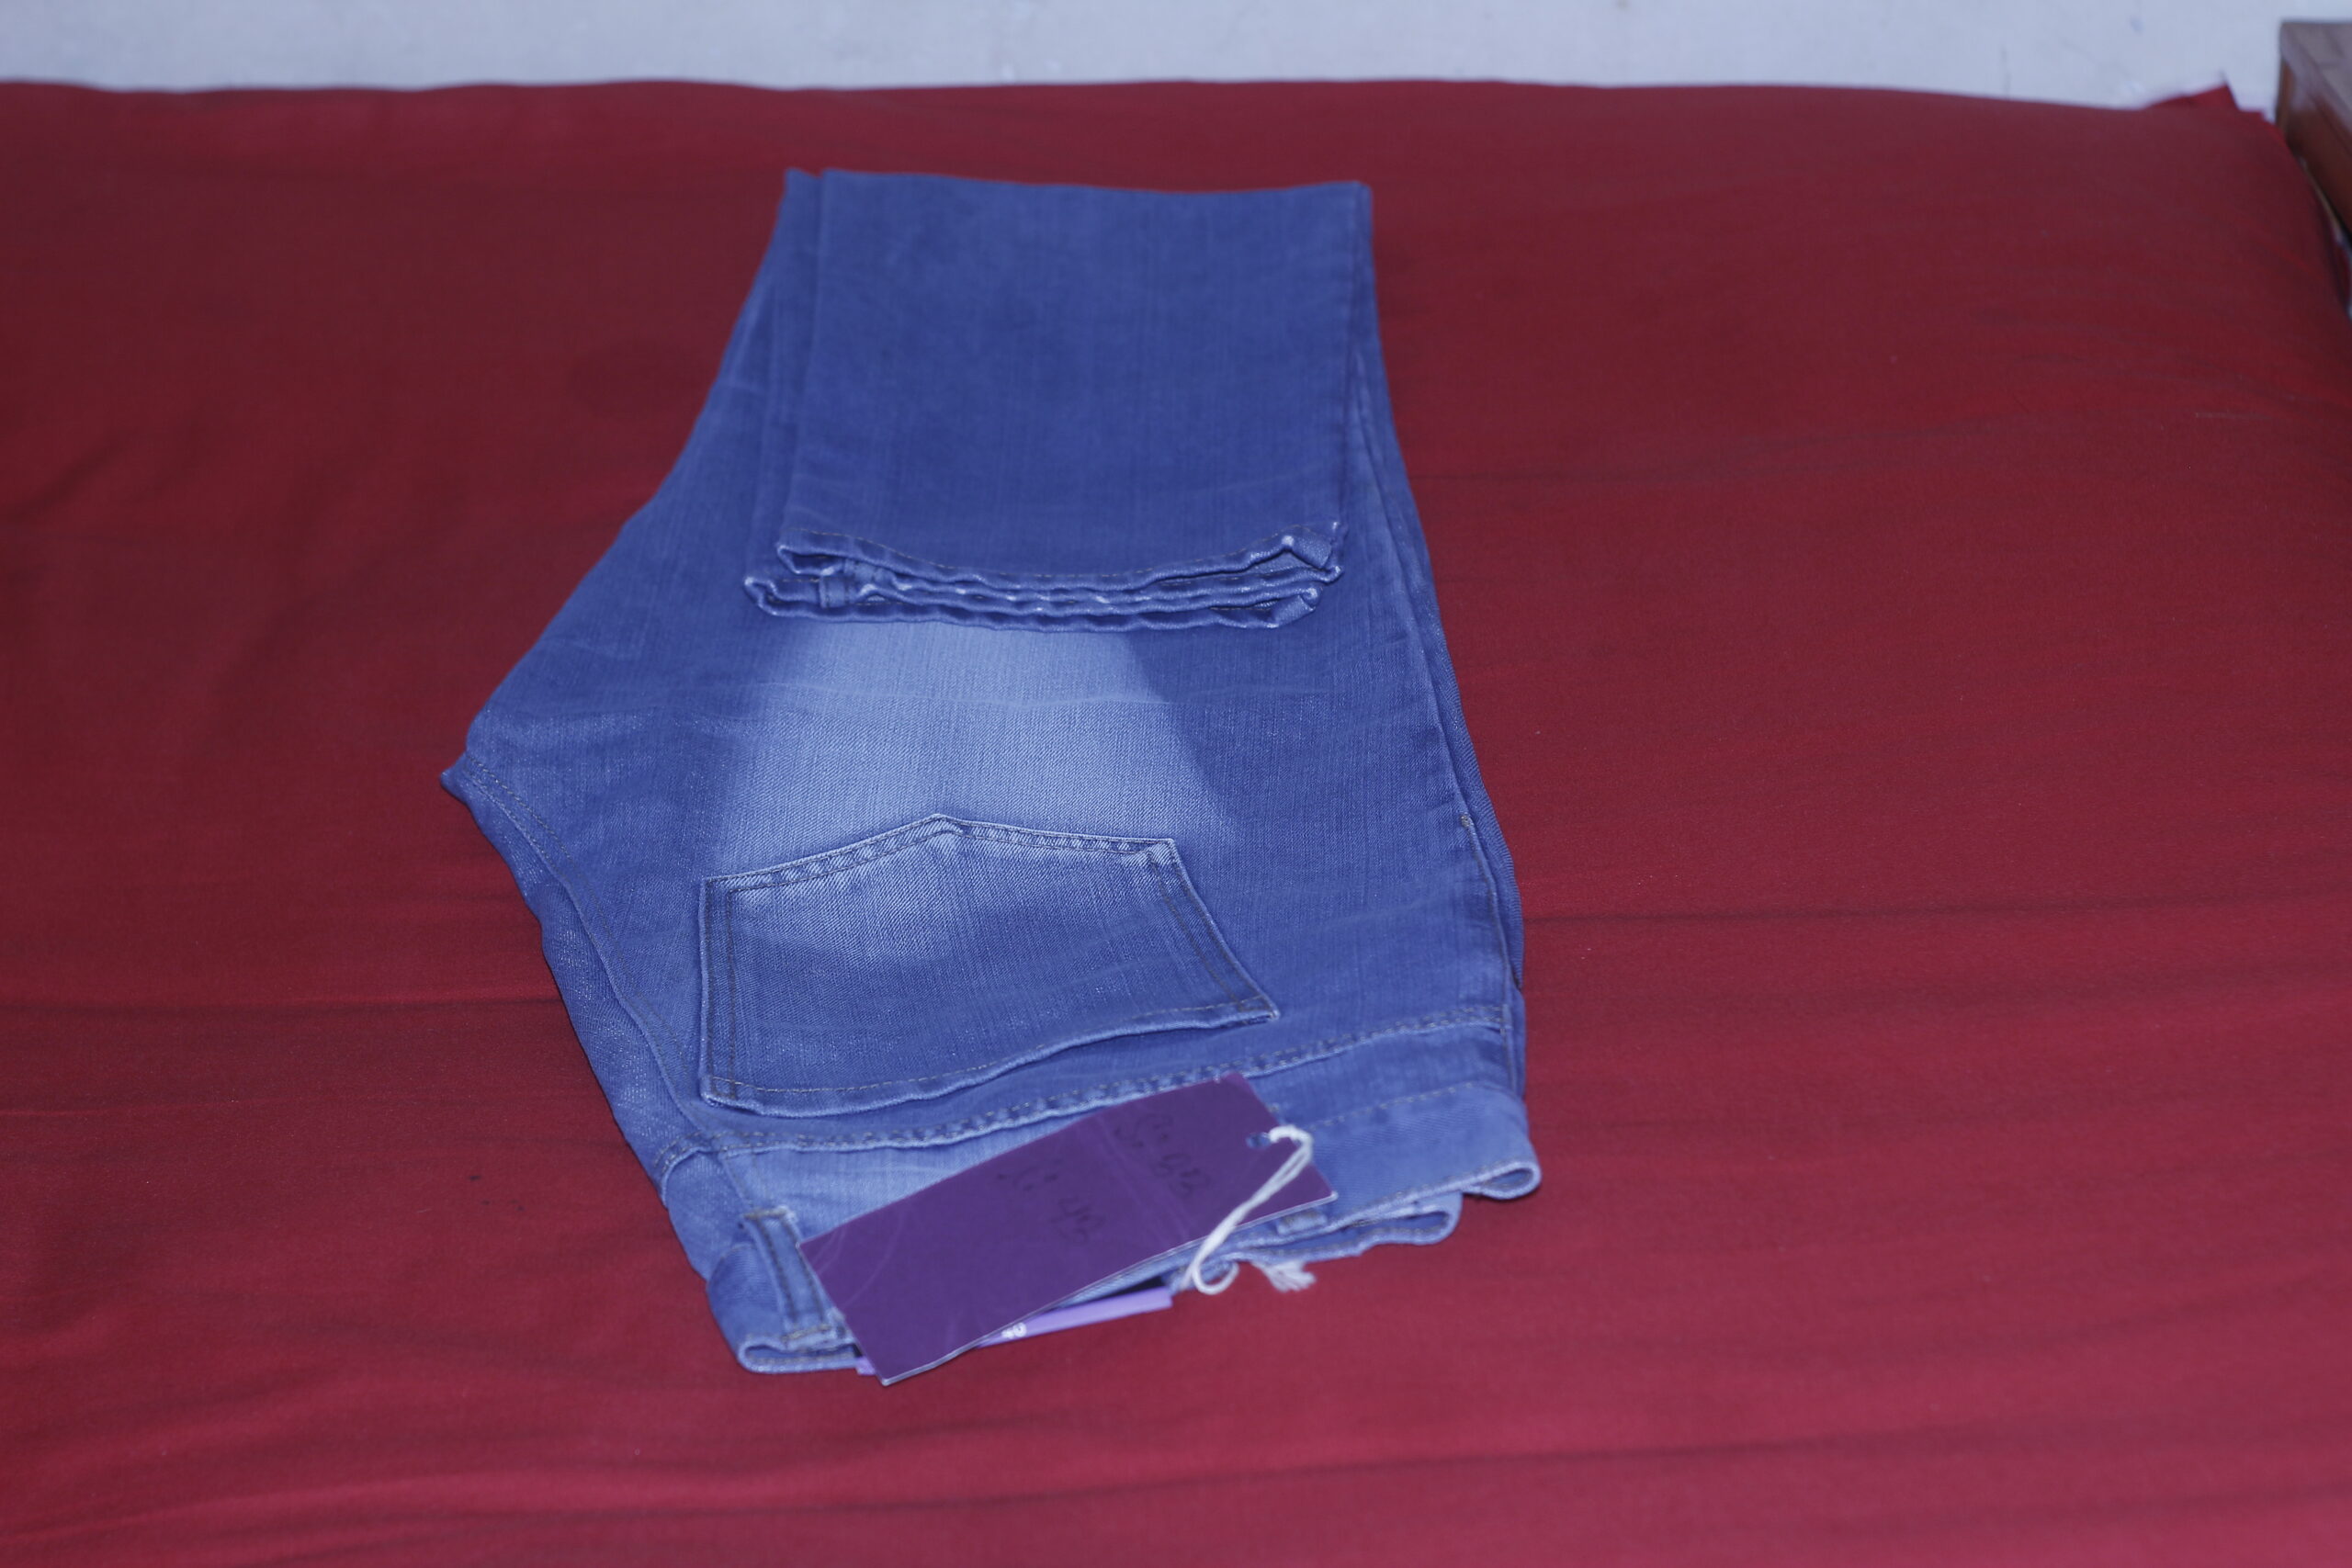 Jeans Pant For Man Size: 33